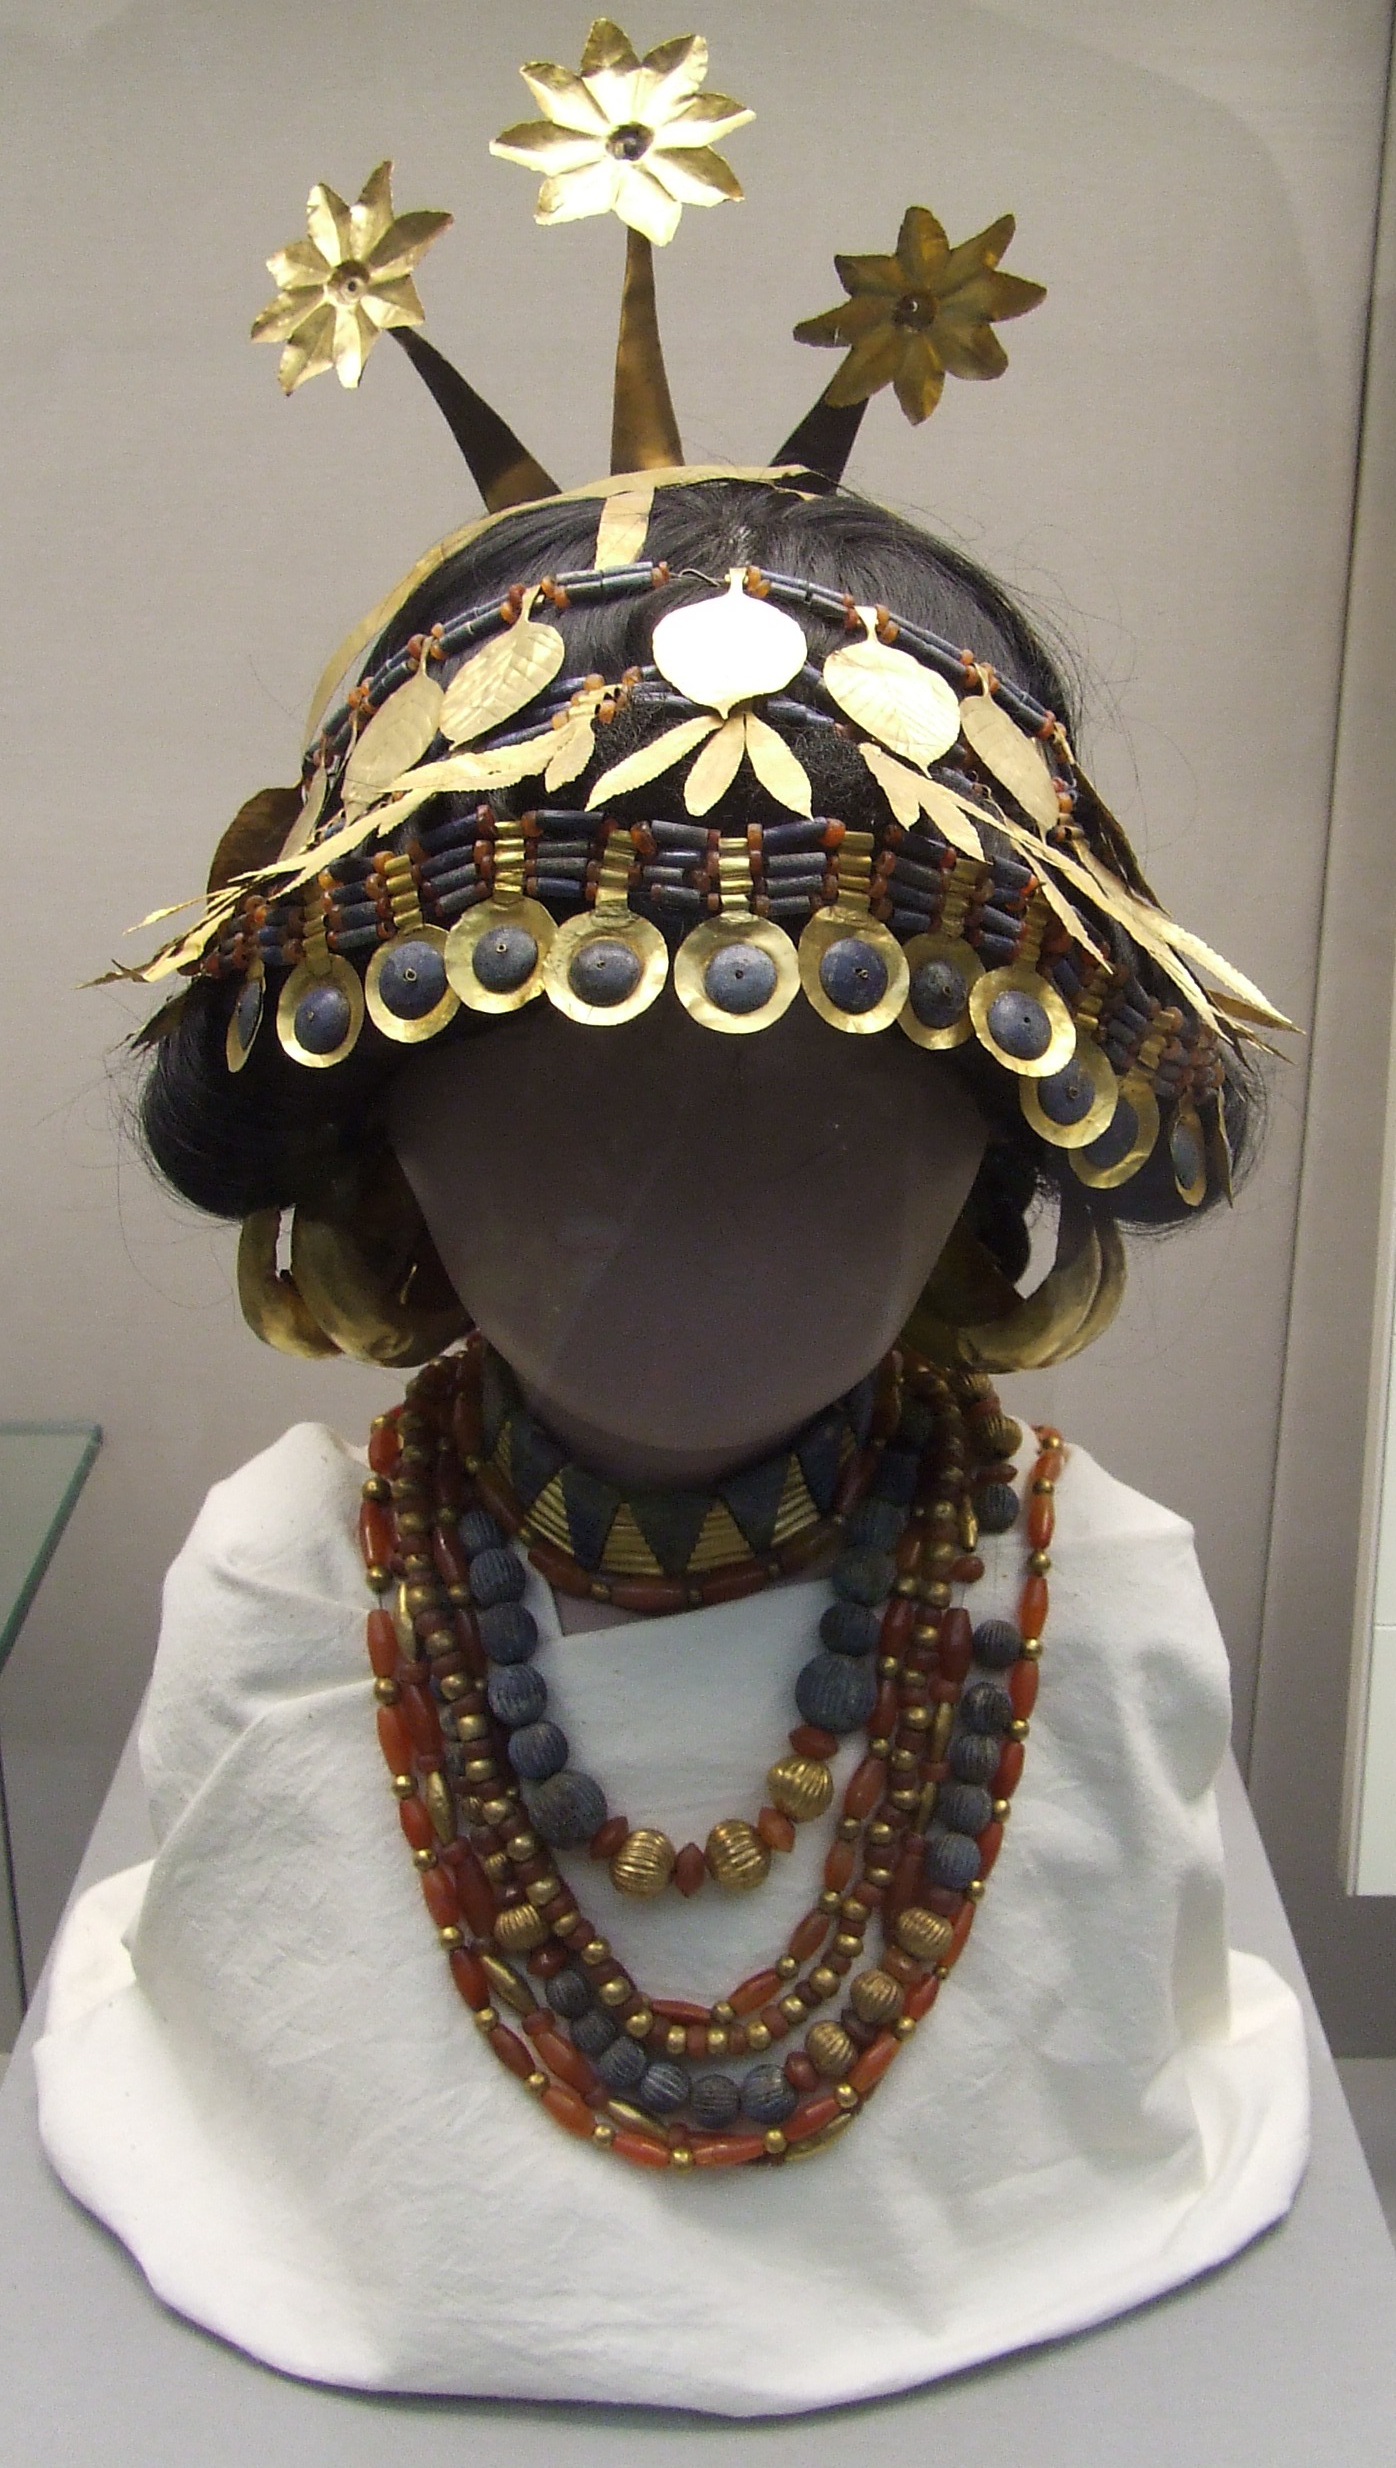 a mannequin wearing a headdress made of metal and beads.